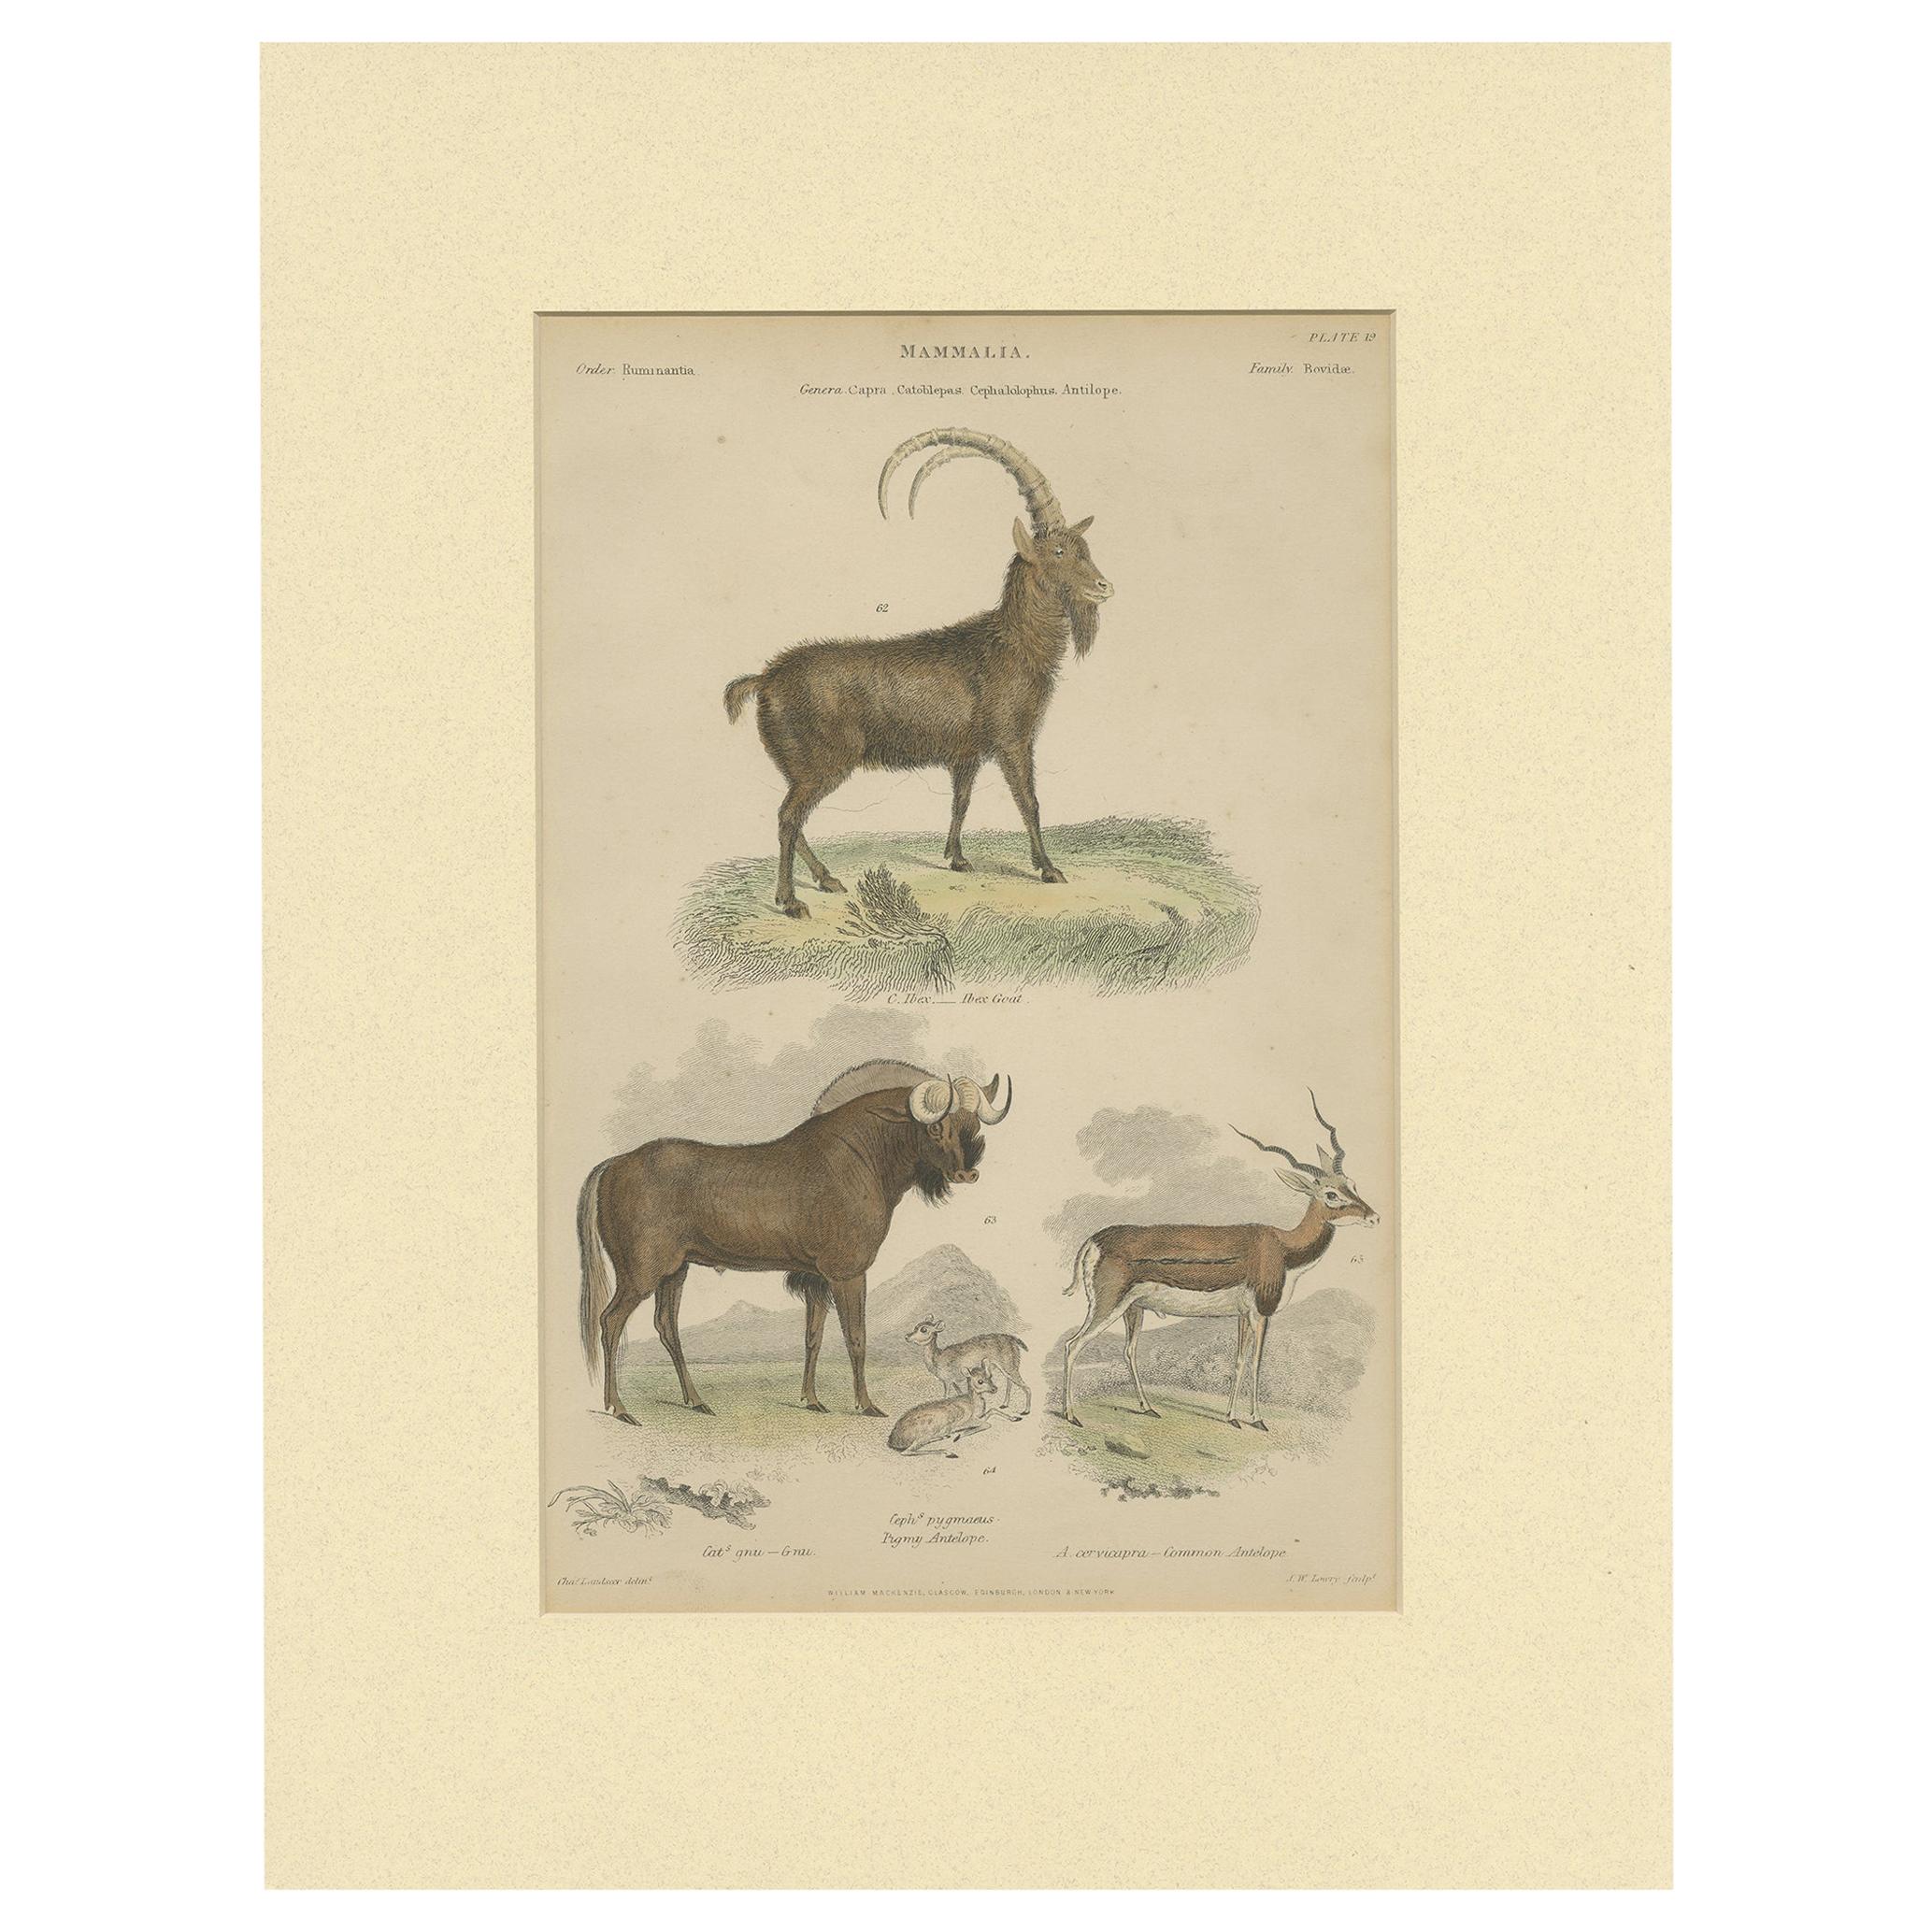 Pl. 19 Antique Print of a Goat, Gnu and Antelope by Richardson 'circa 1860'